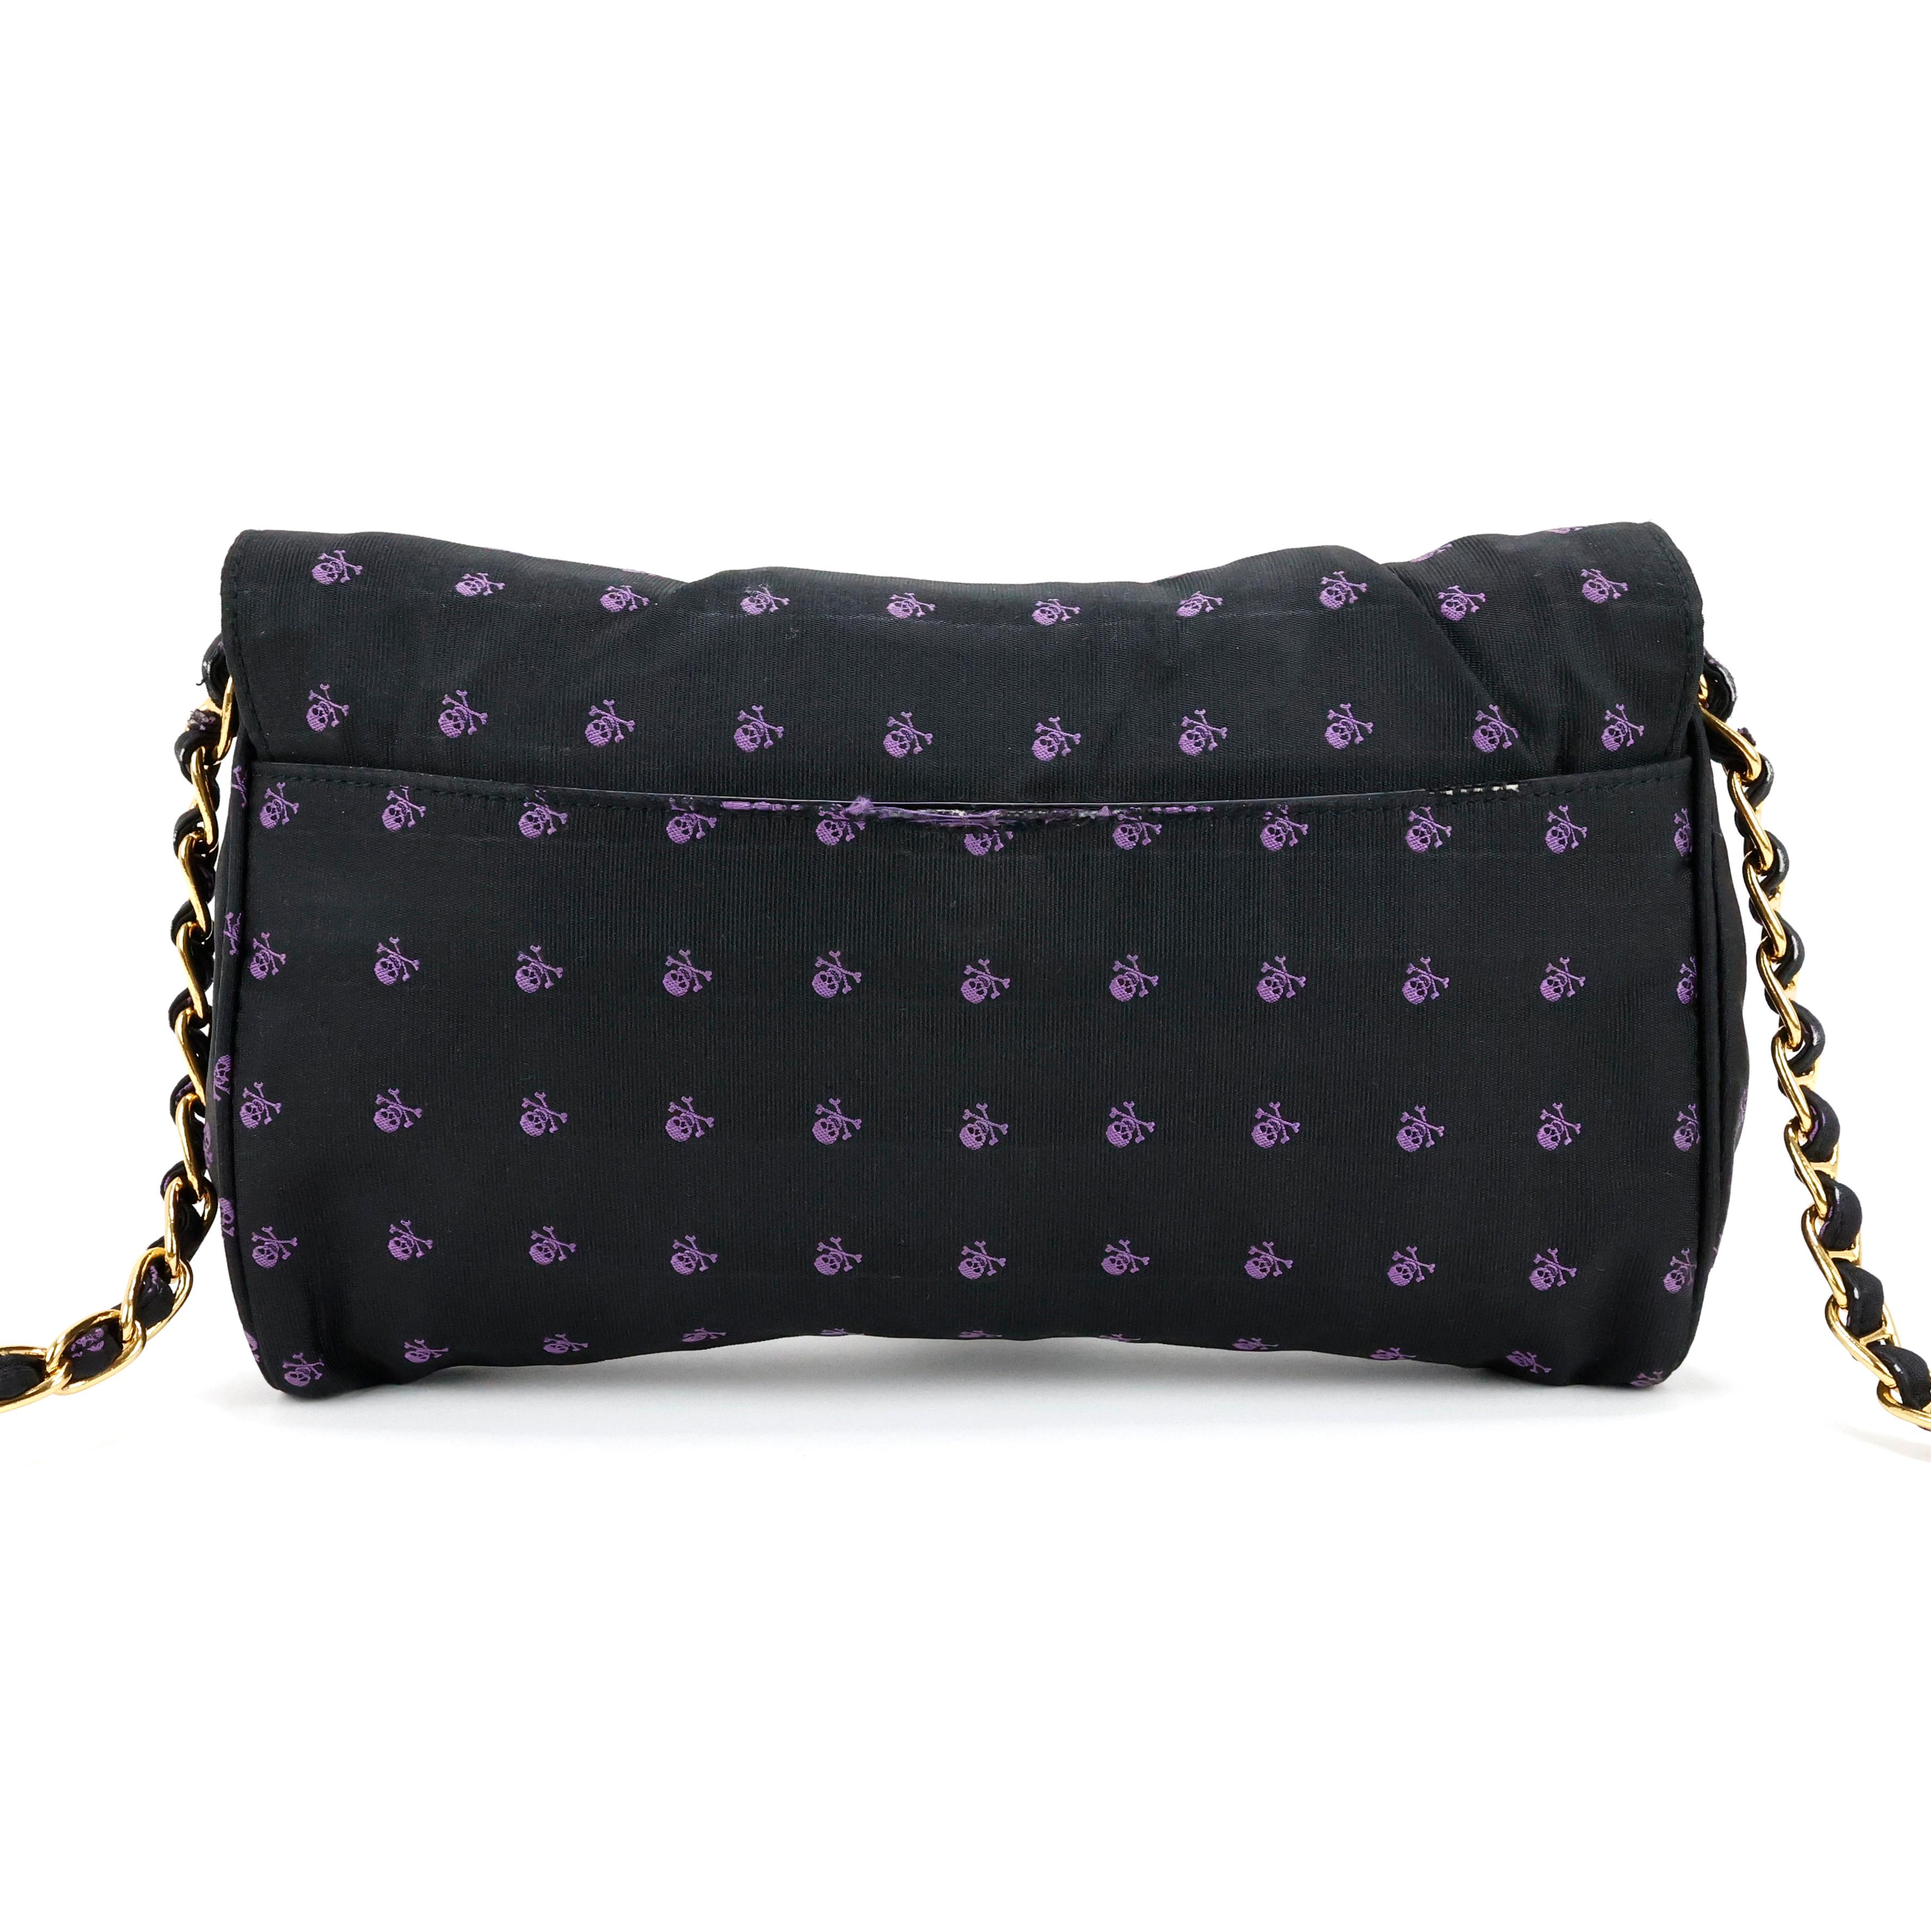 Prada crossbody bag in black tessuto with purple skull pattern, chain handle, gold hardware.


Condition:
Good.


Packing/accessories:
Dustbag, authenticity card.


Measurements:
25cm x 15cm x 4cm